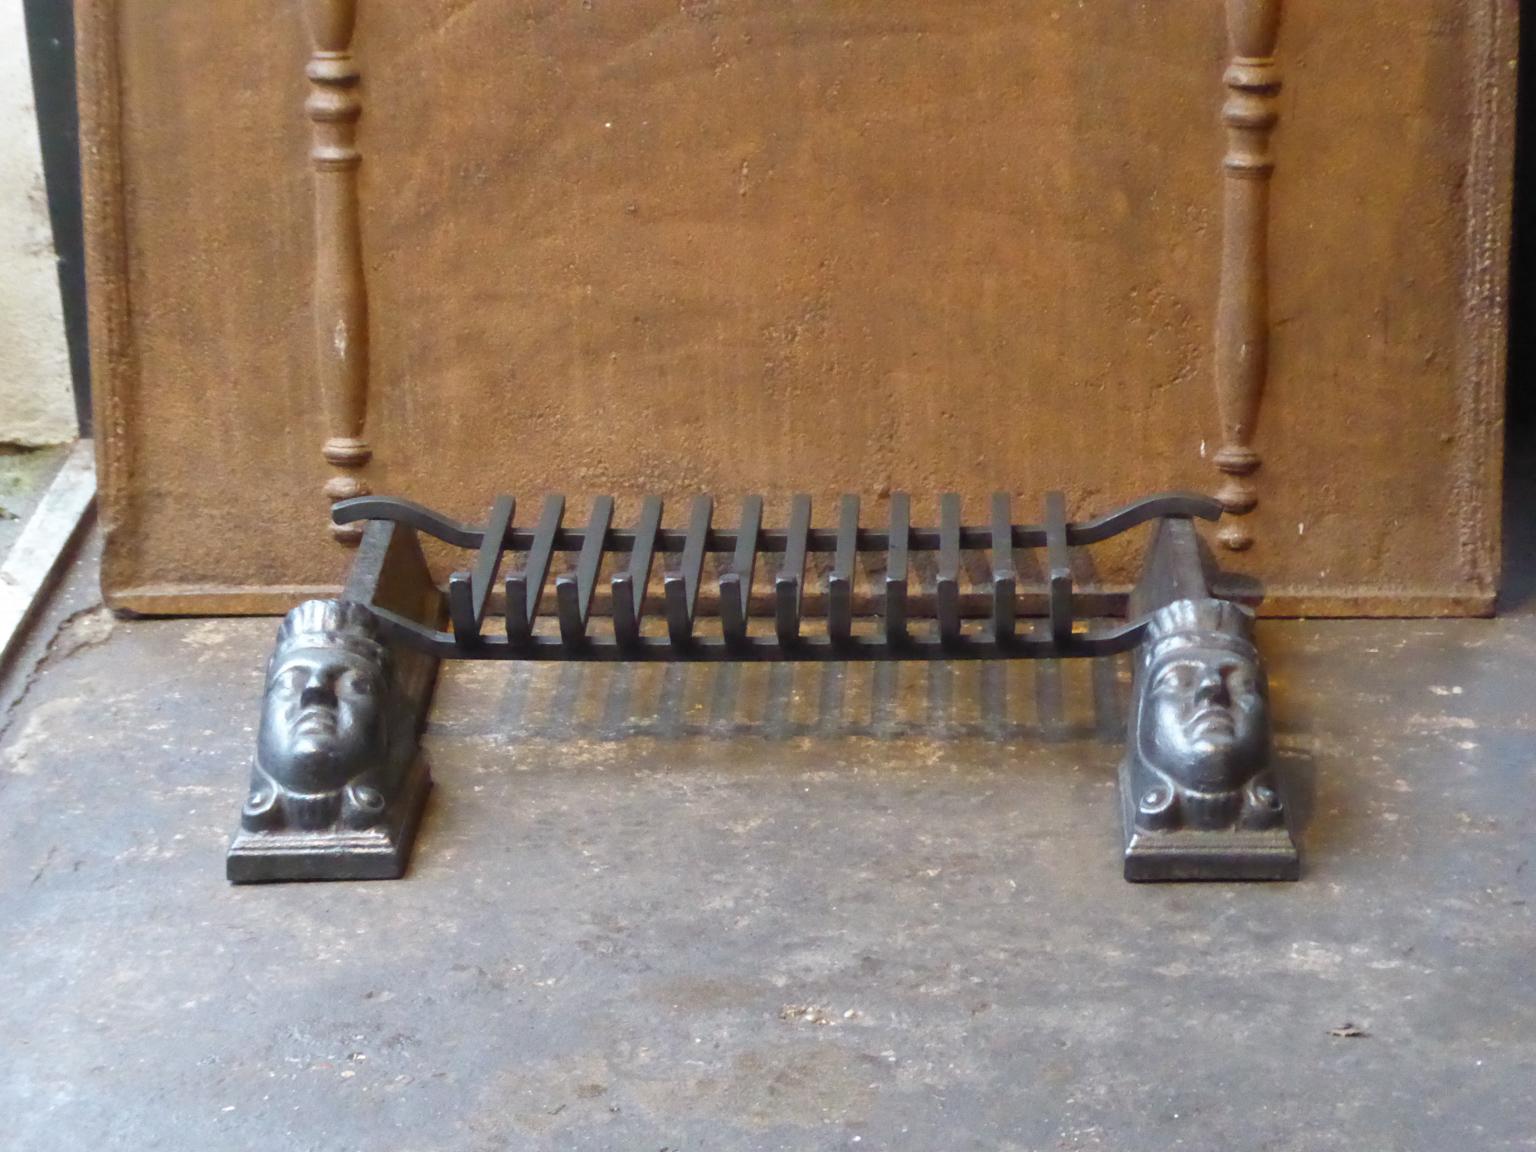 18th-19th century French neoclassical fireplace basket - fire basket made of cast iron and wrought iron. The basket is in a good condition and is fully functional.